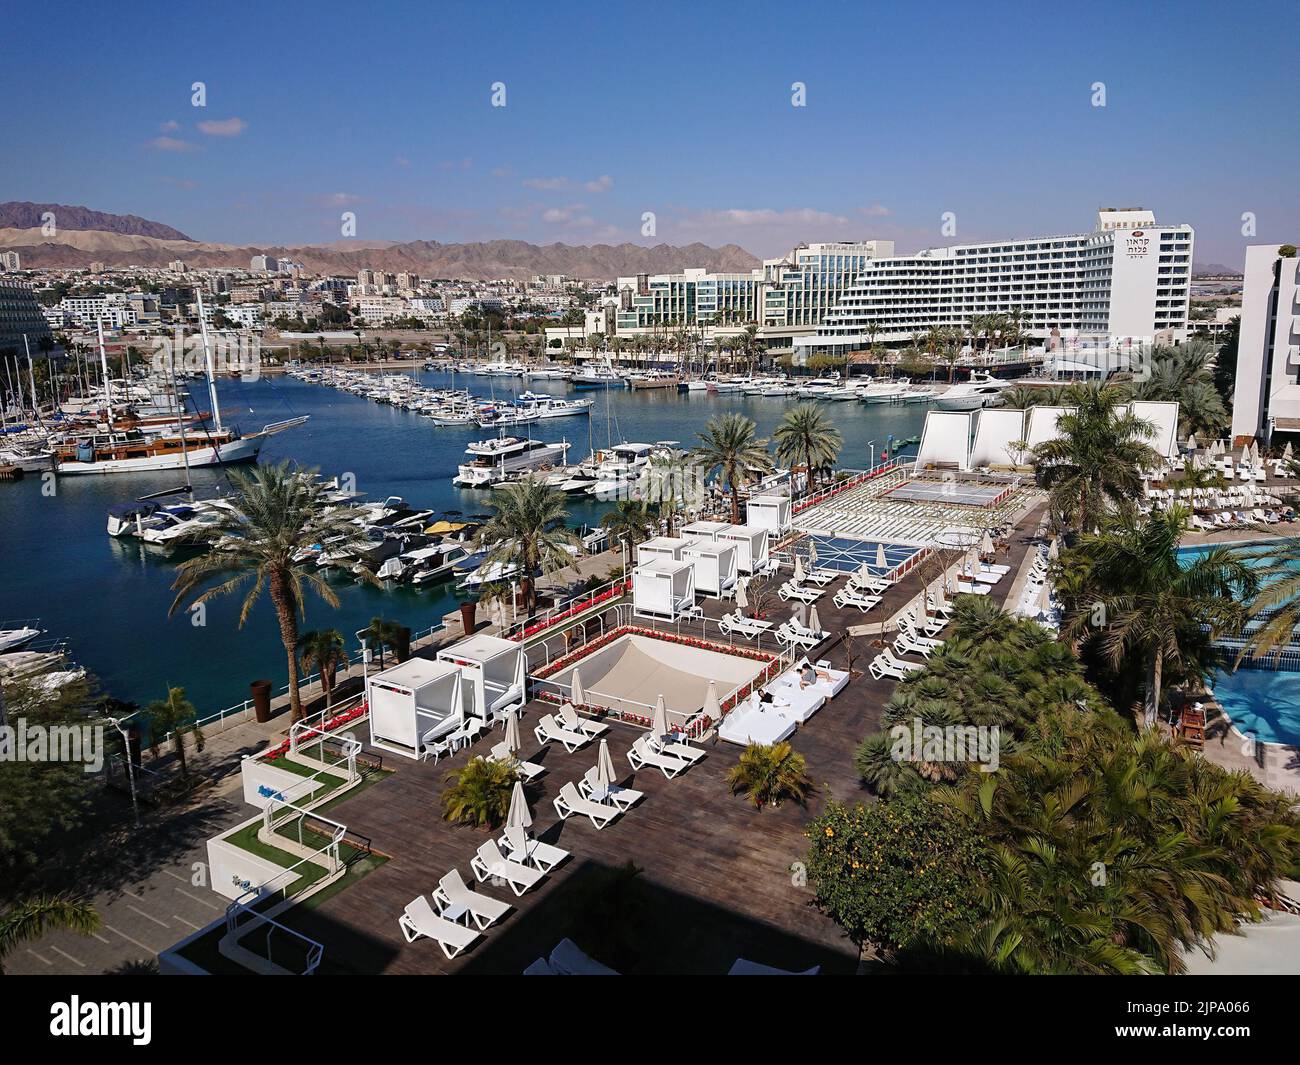 A view of the marina in the Red Sea Israeli resort of Eilat Stock Photo